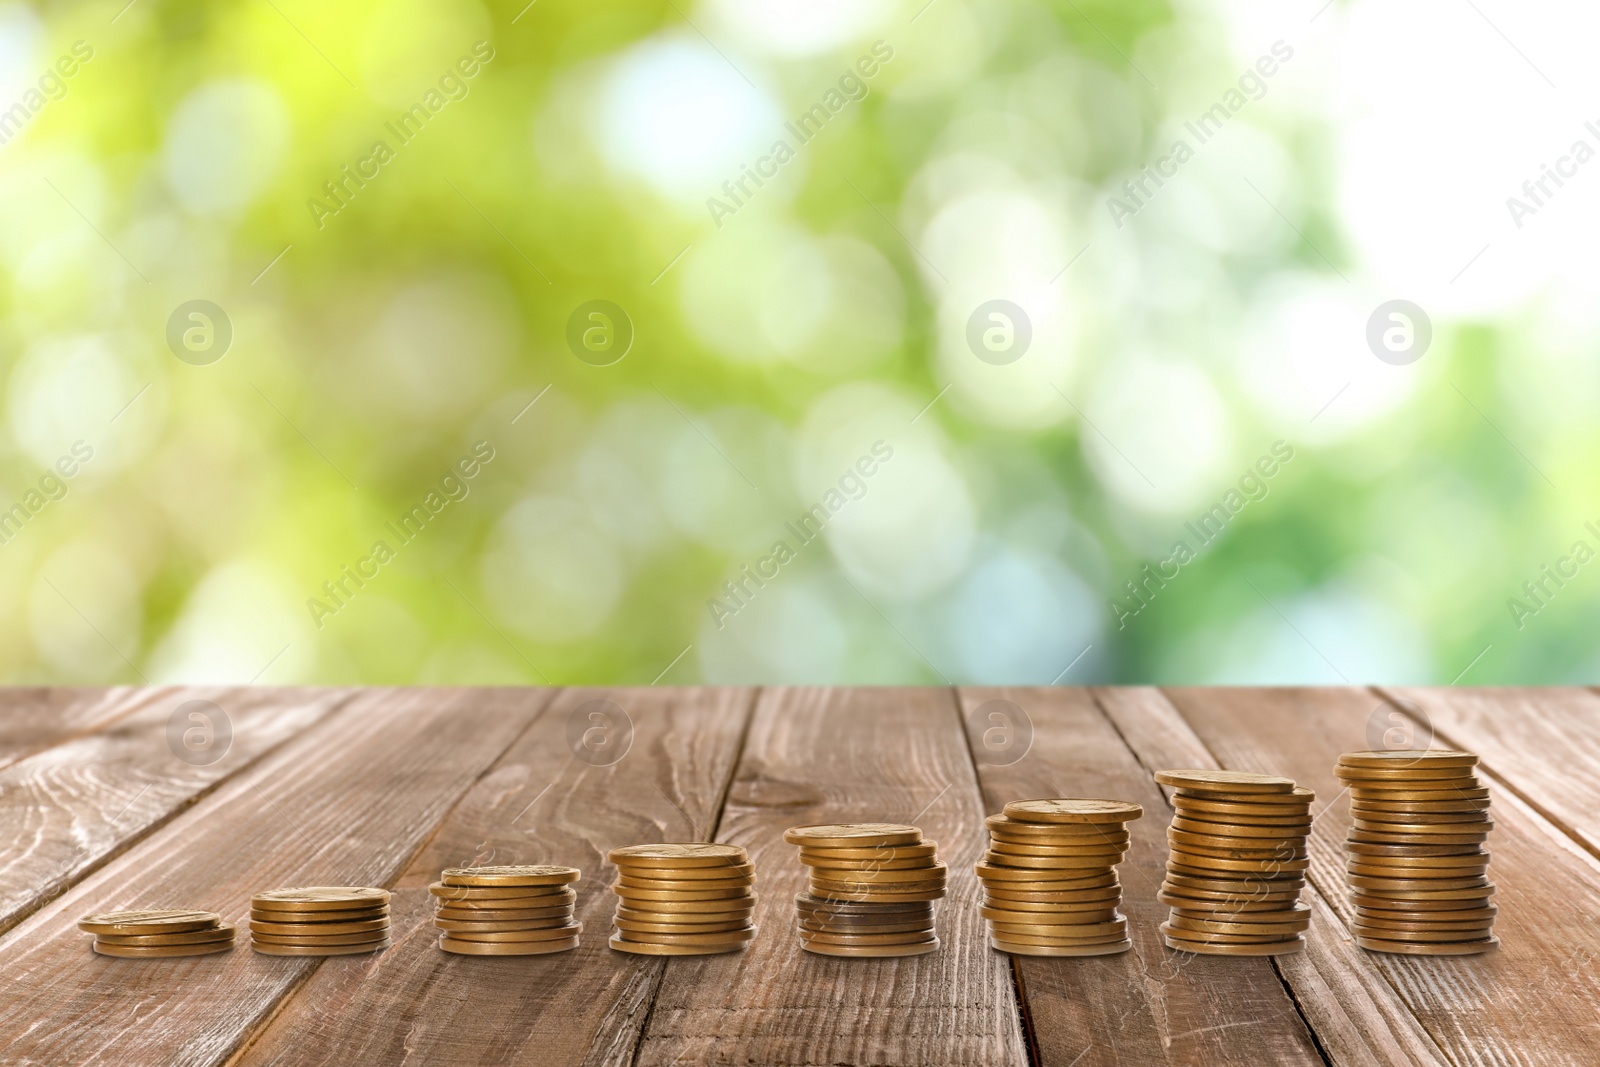 Image of Stacked coins on wooden table against blurred background. Investment concept